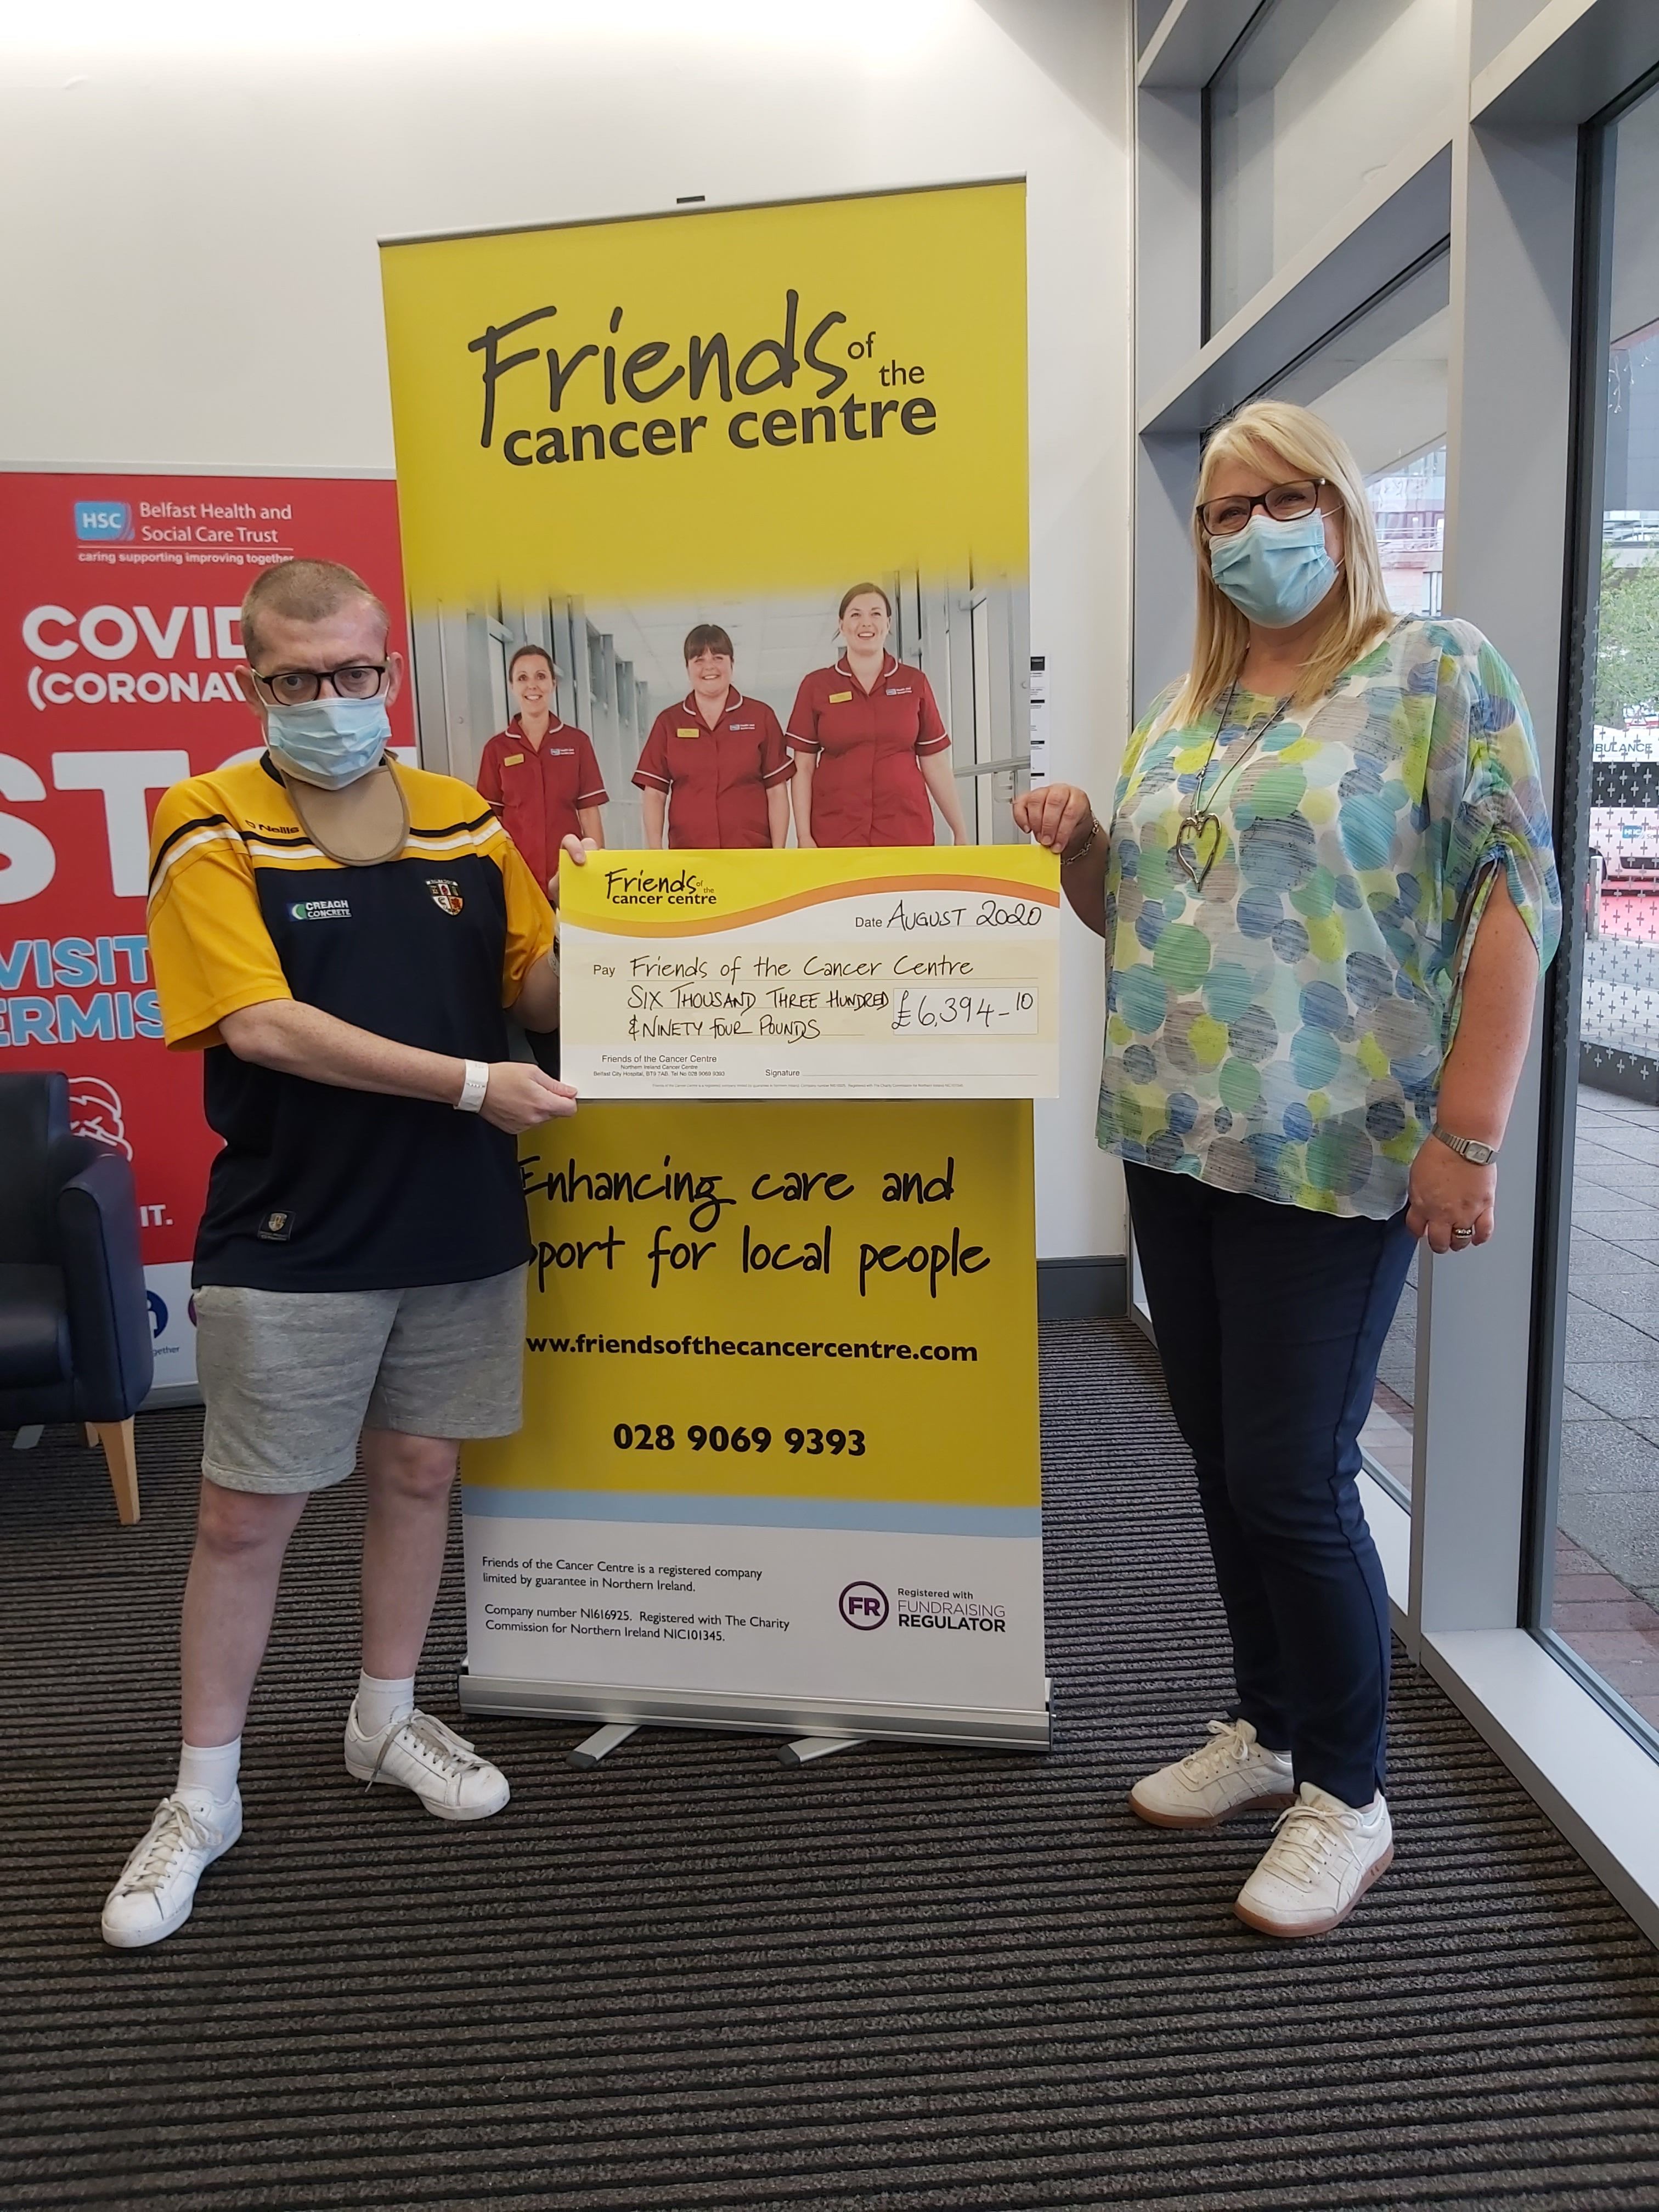 GREAT JOB: Michael O’Neill presents Ana Wilkinson of Friends of the Cancer Centre with a cheque for £6394.10